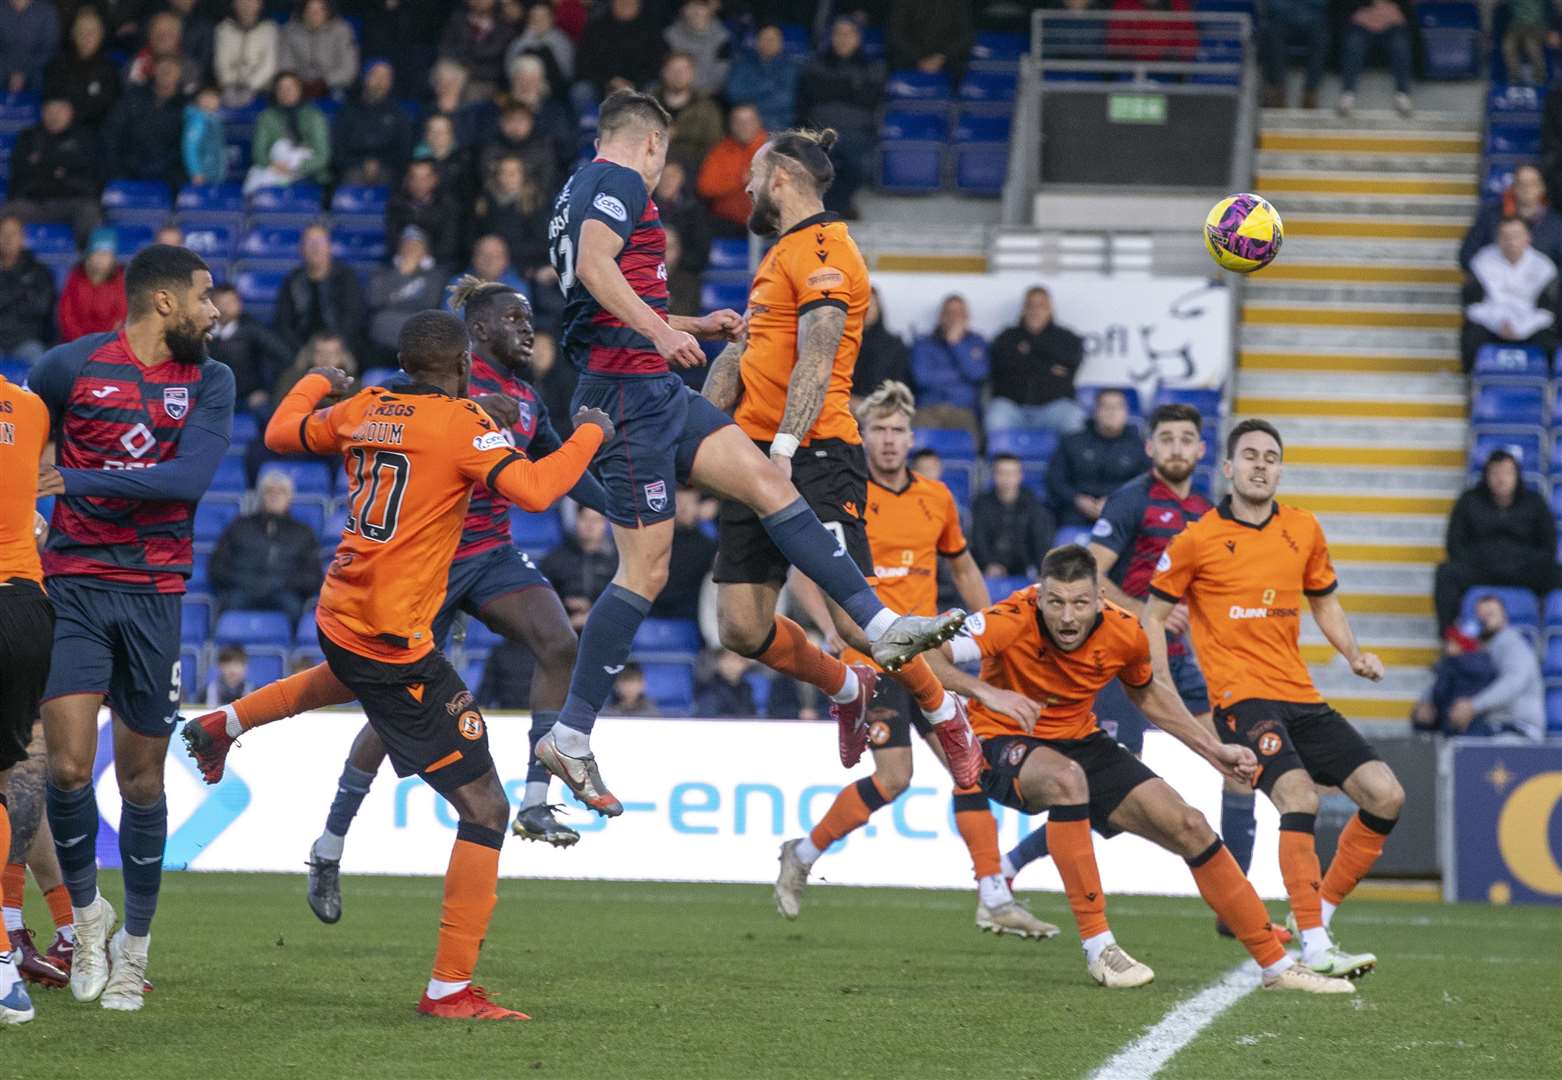 Picture - Ken Macpherson. Ross County(1) v Dundee Utd(1). 15/10/22. Ross County's Callum Johnson heads only inches wide in the final minute.